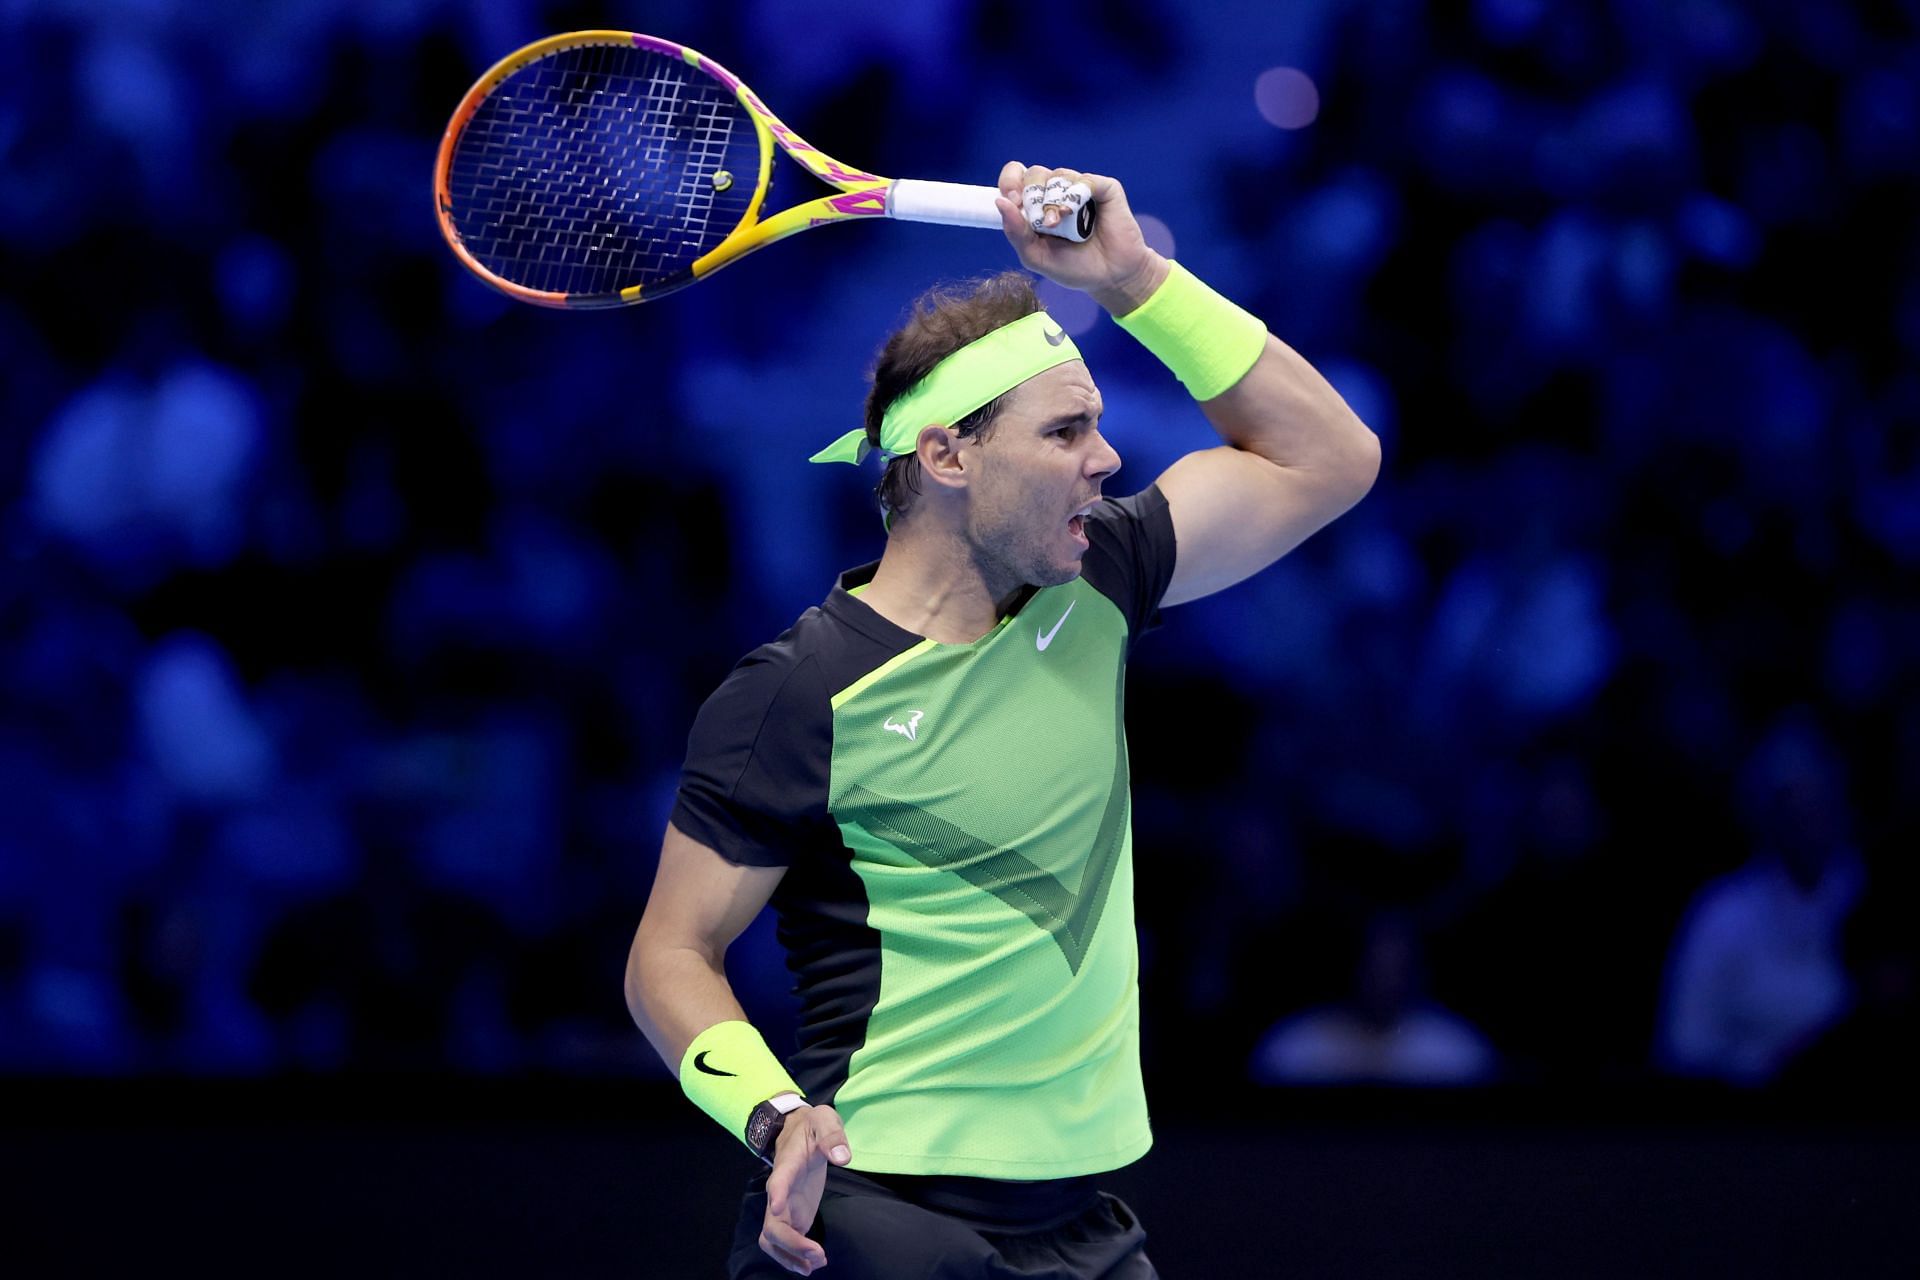 Rafael Nadal in action at the 2022 ATP Finals in Turin